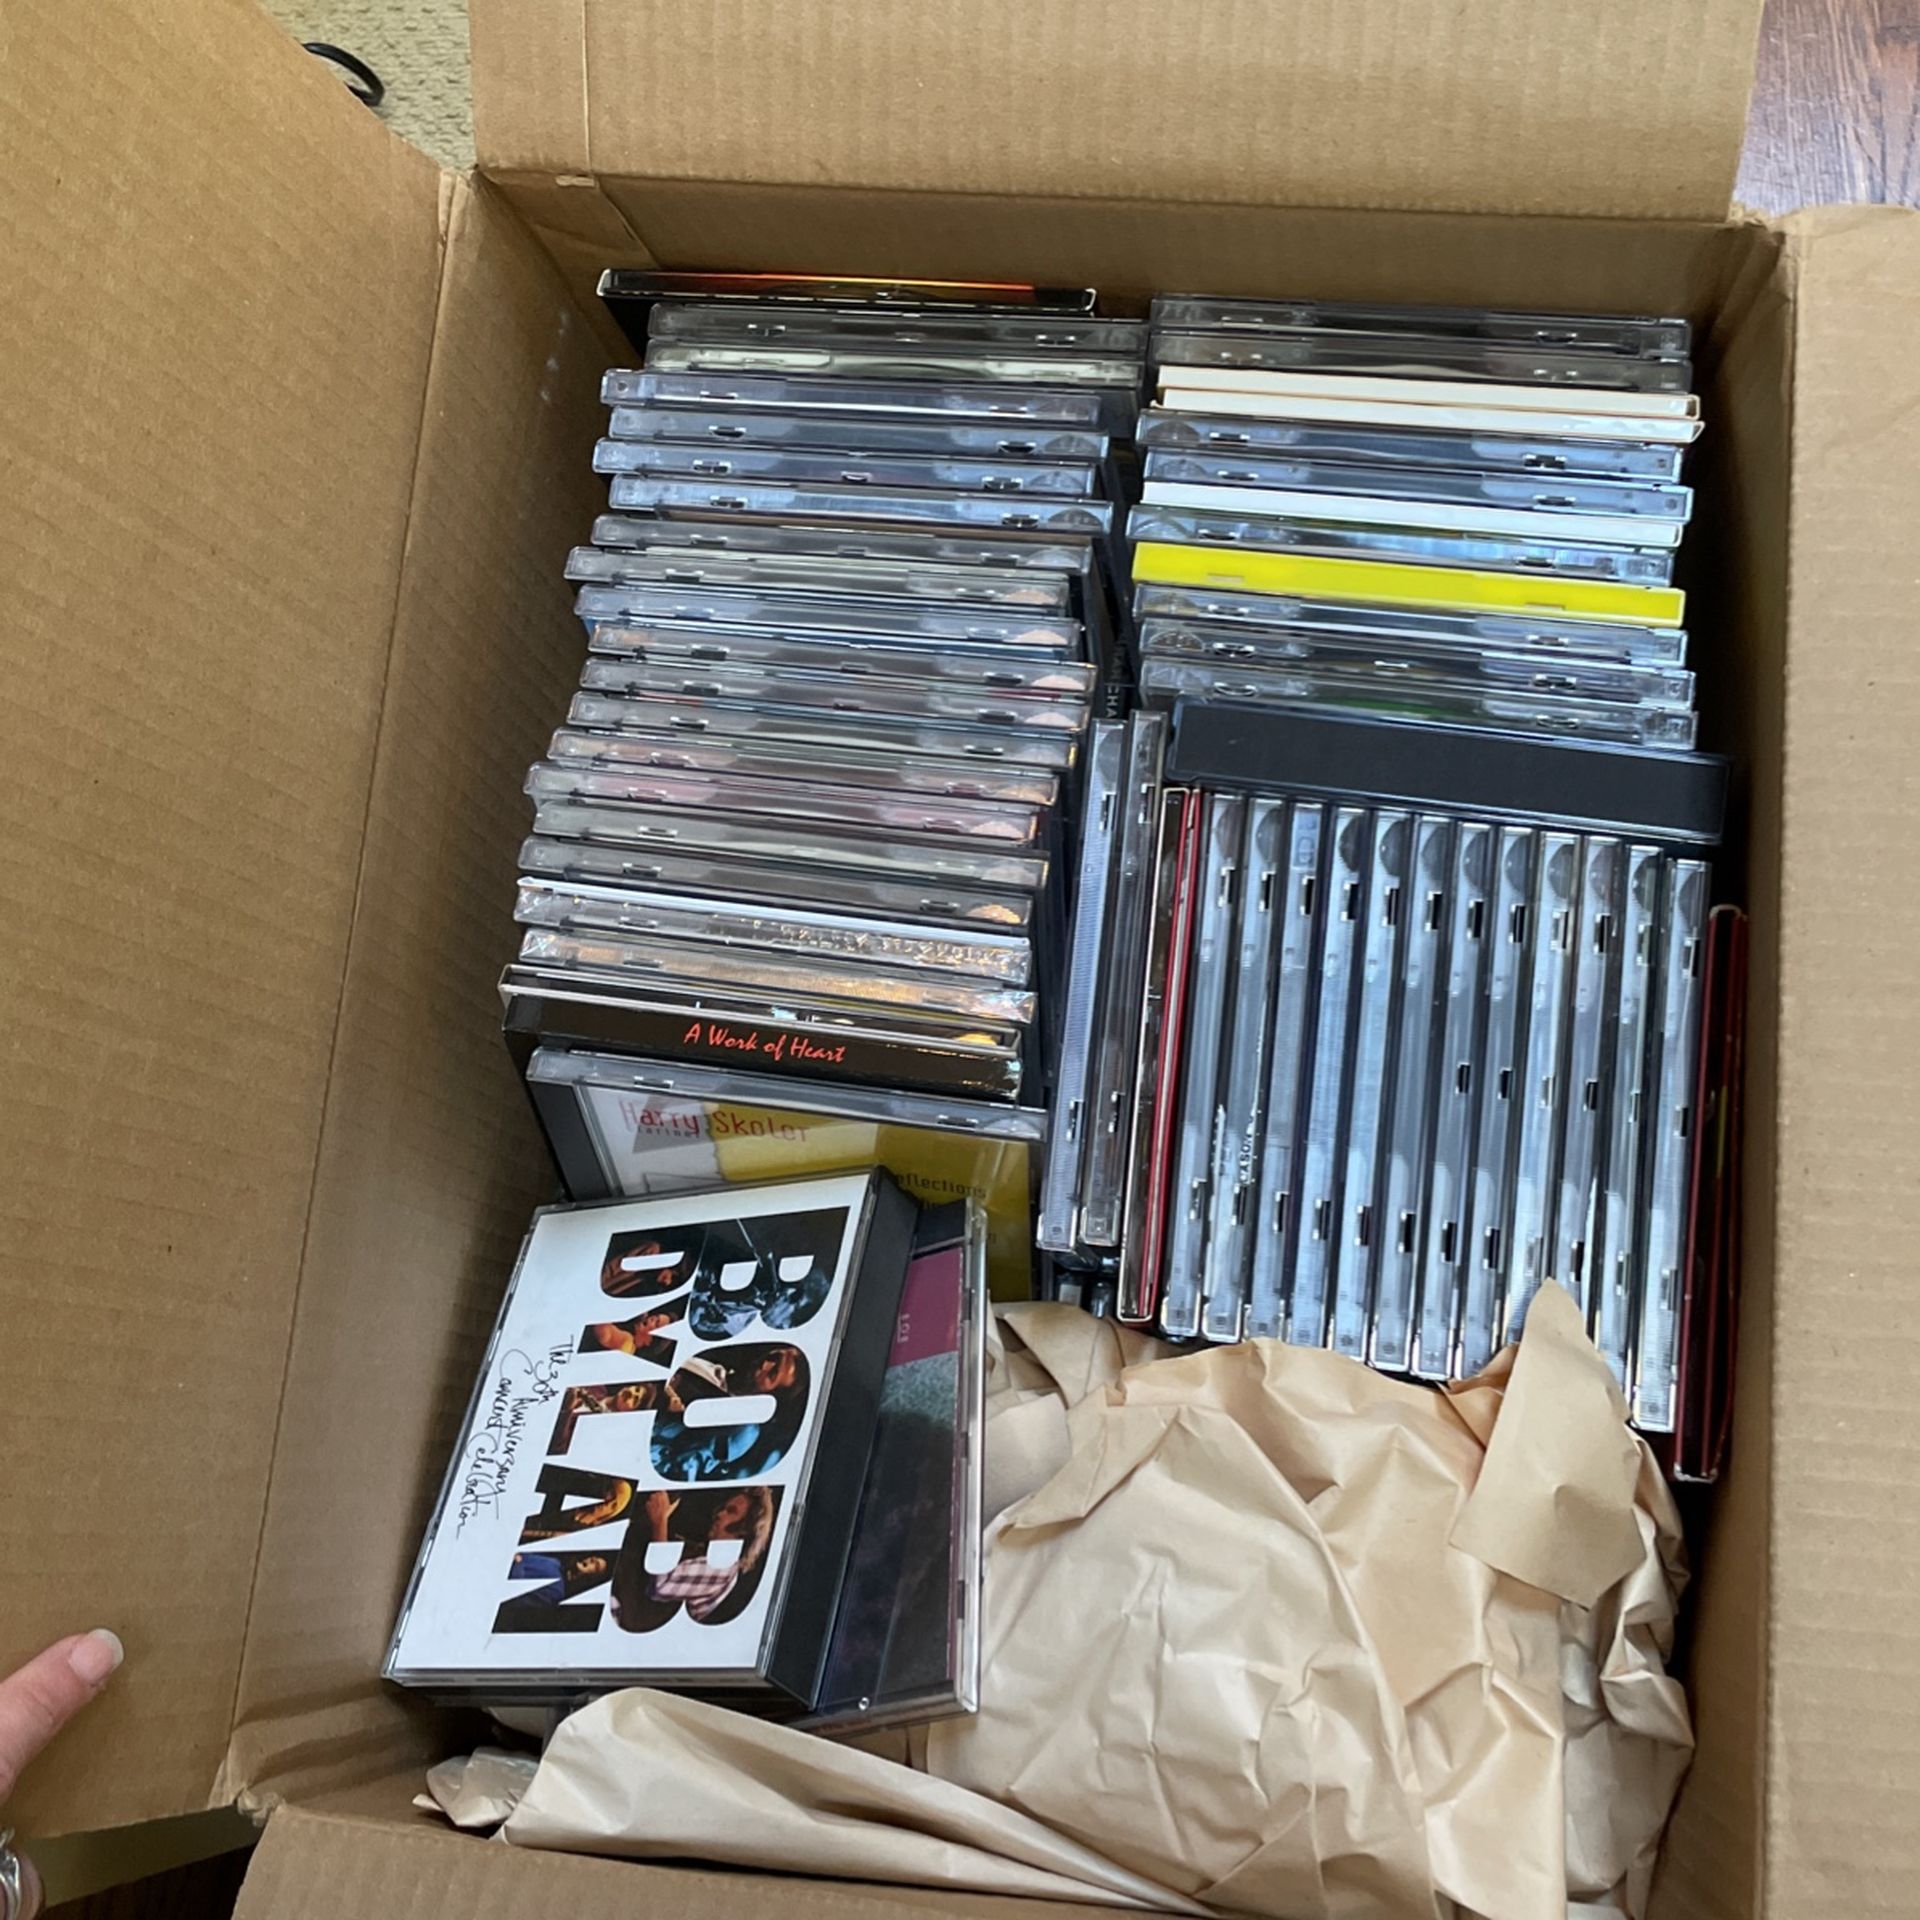 CDs — Approx 300 in Cases